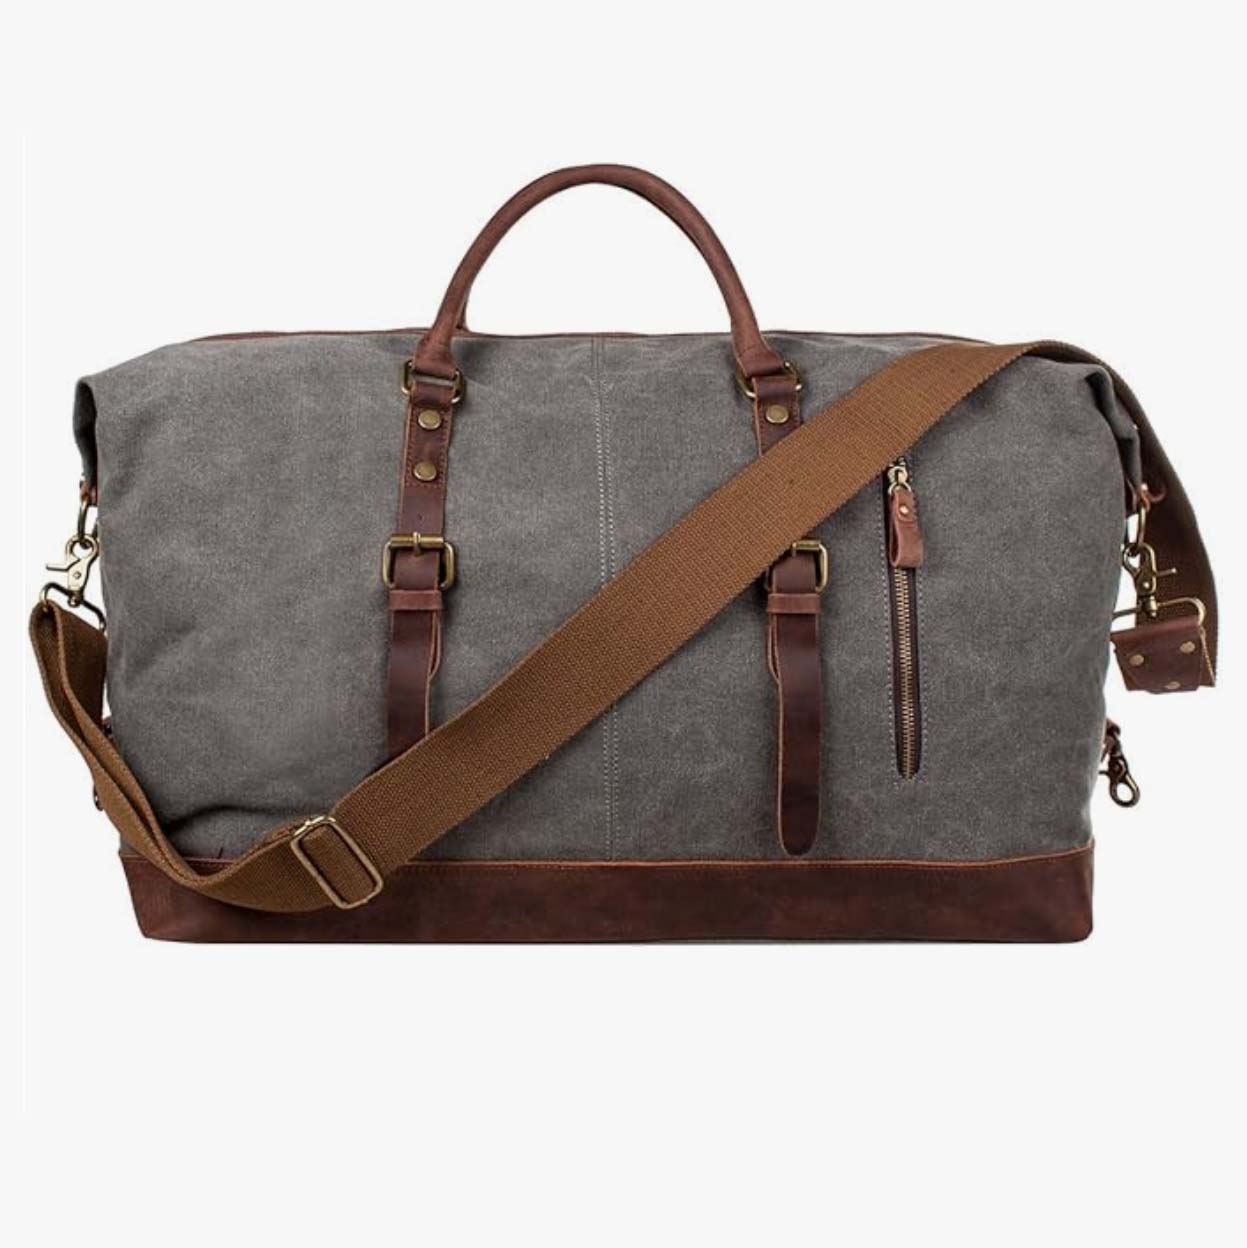 Dark grey and brown duffle bag with leather straps